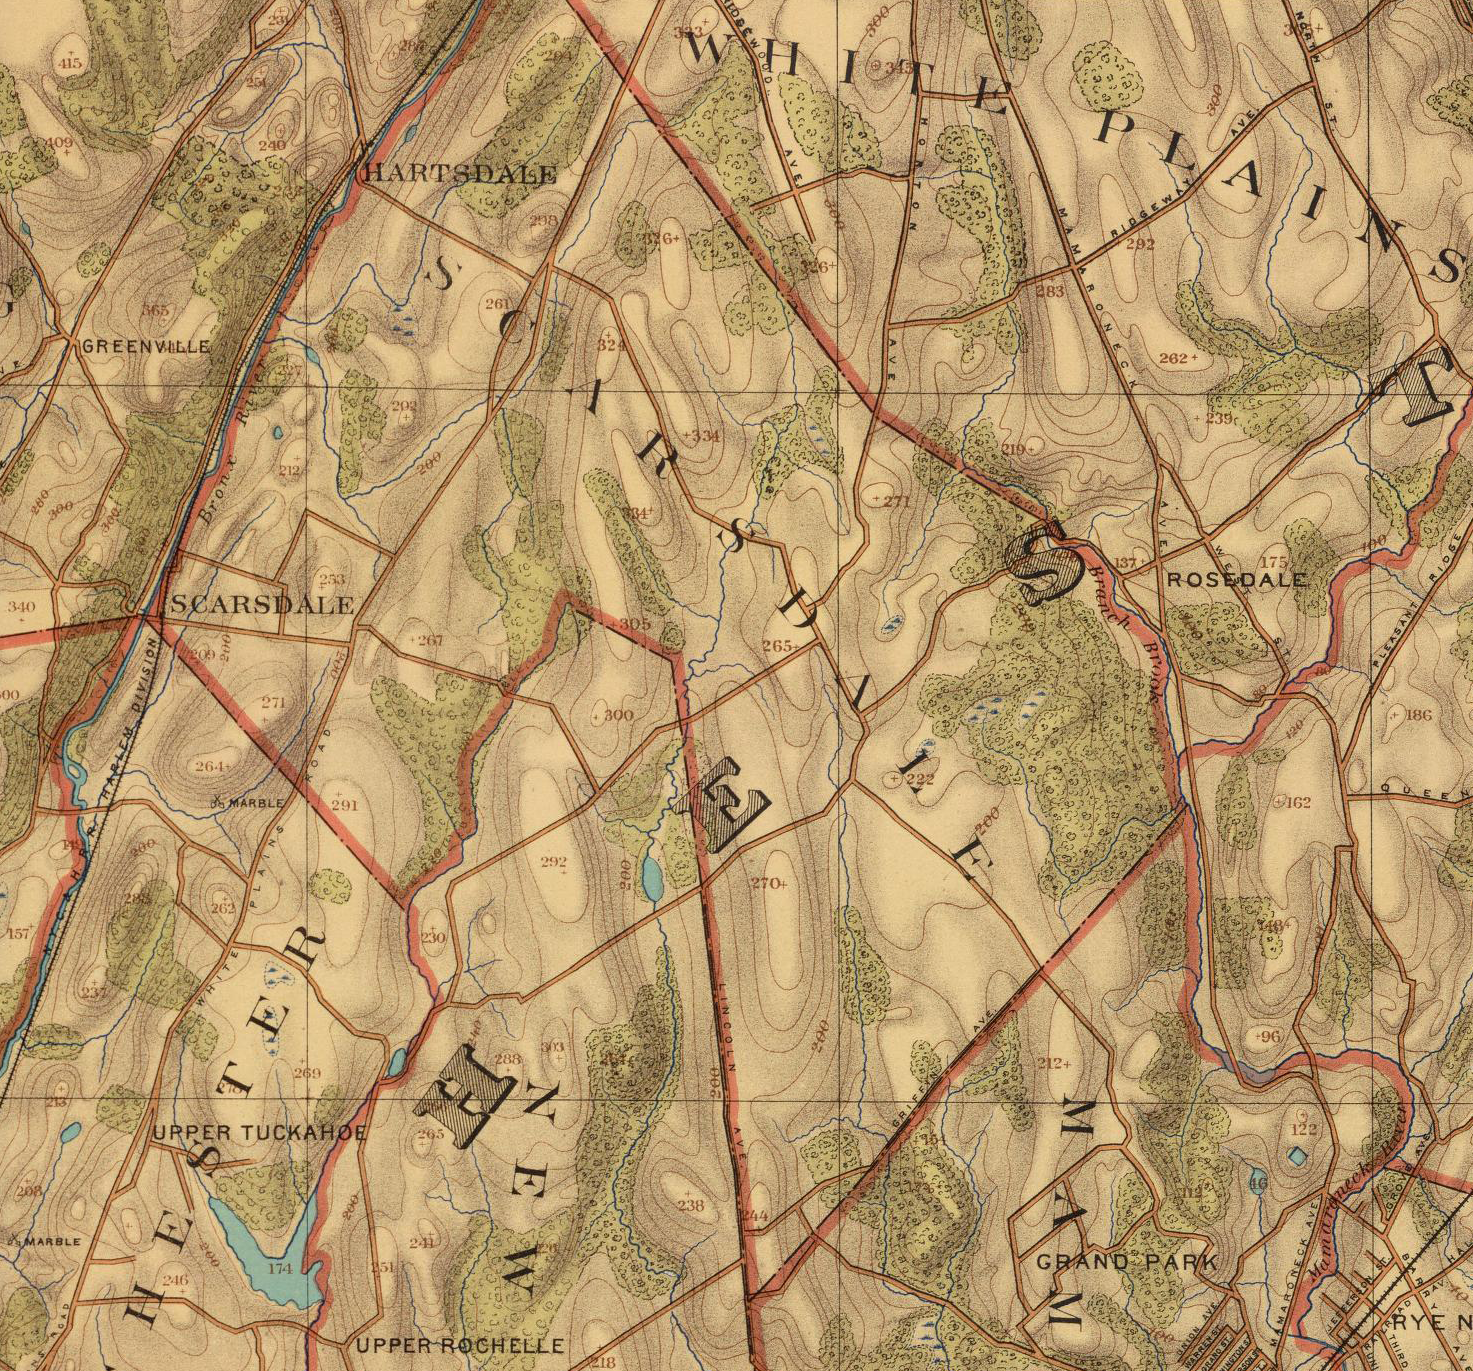 Detail of the Scarsdale area, topographic map, 1893.